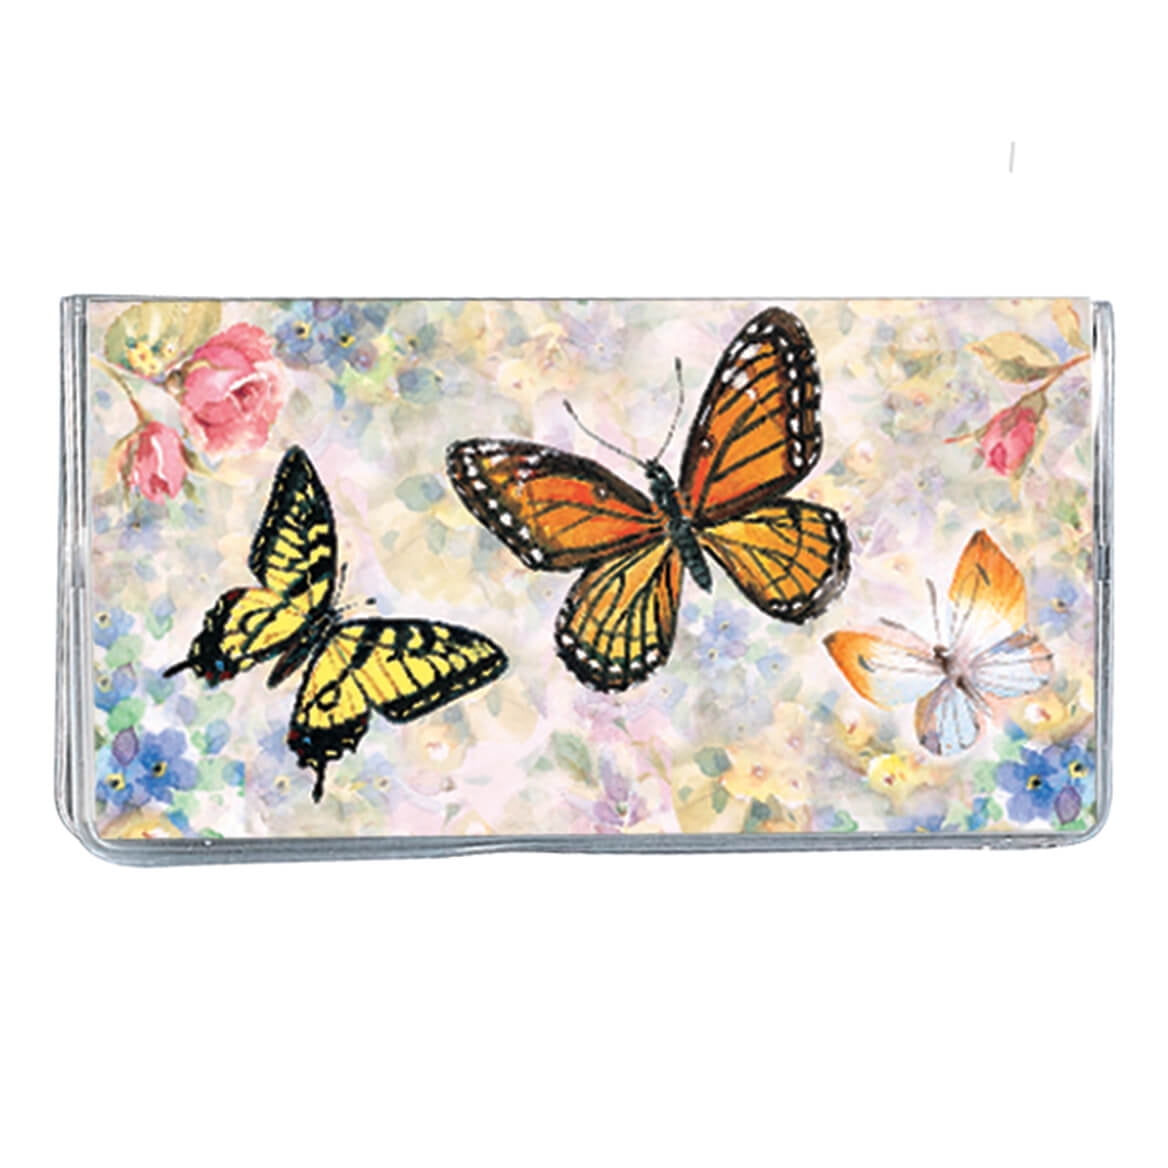 butterfly-two-year-planner-pocket-sized-calendar-ideal-for-purses